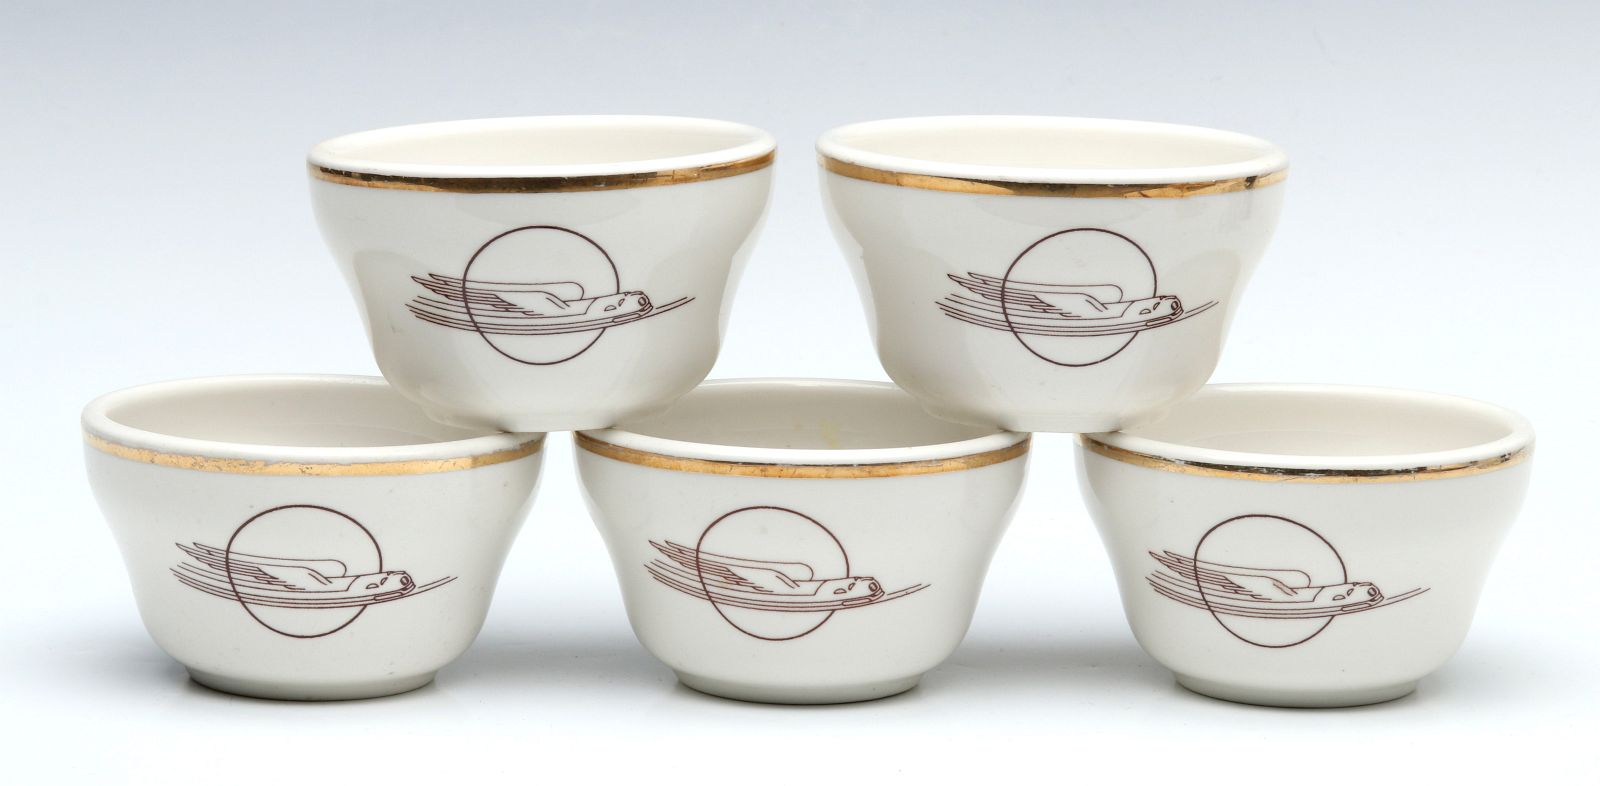 UNION PACIFIC RR WINGED STREAMLINER CUSTARD CUPS